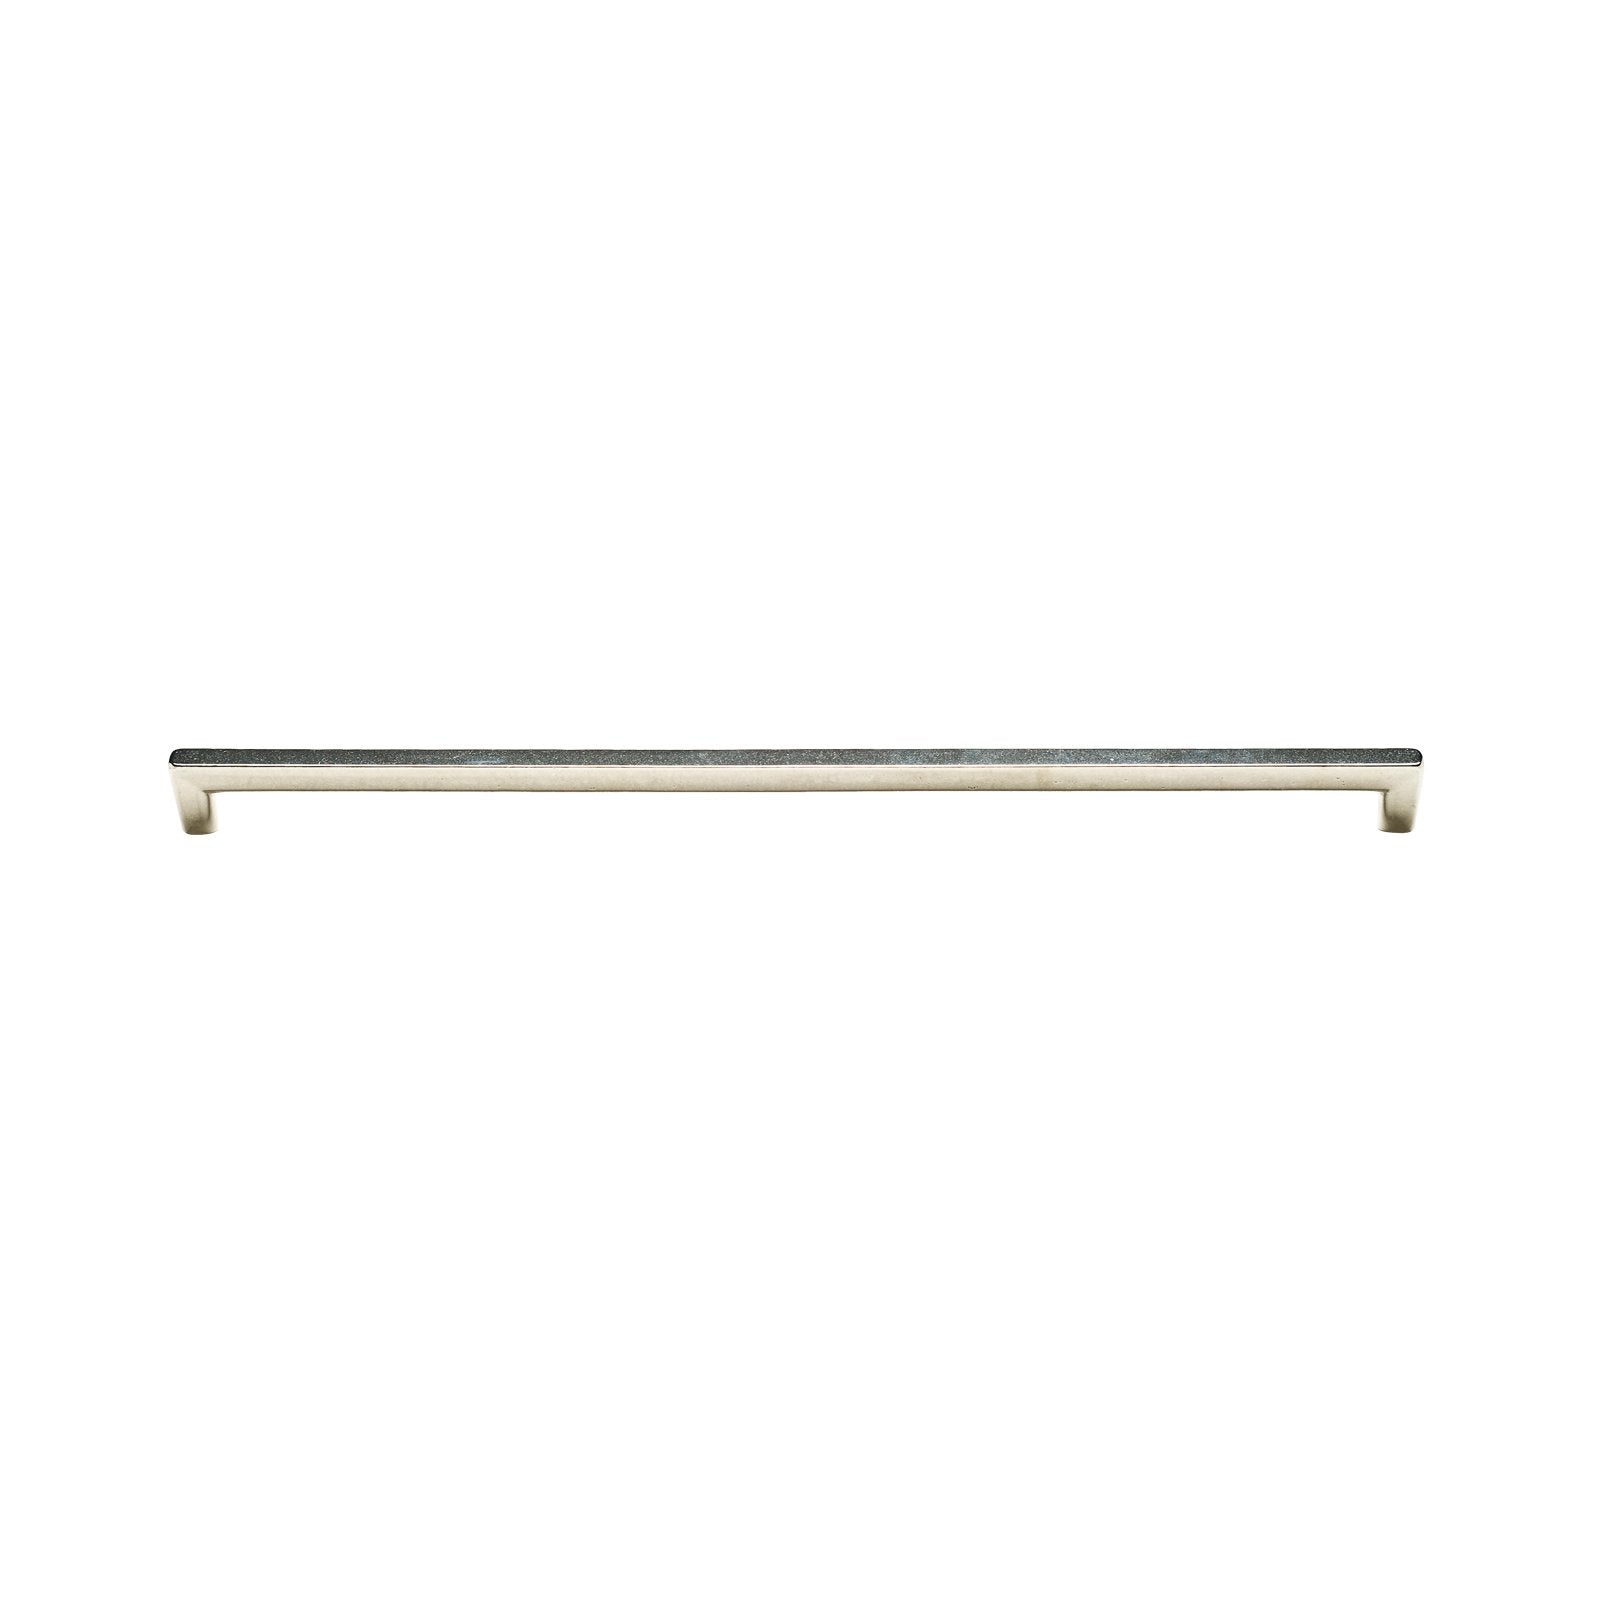 Rocky Mountain Hardware CK285 - 18" C-to-C Rail Cabinet Pull